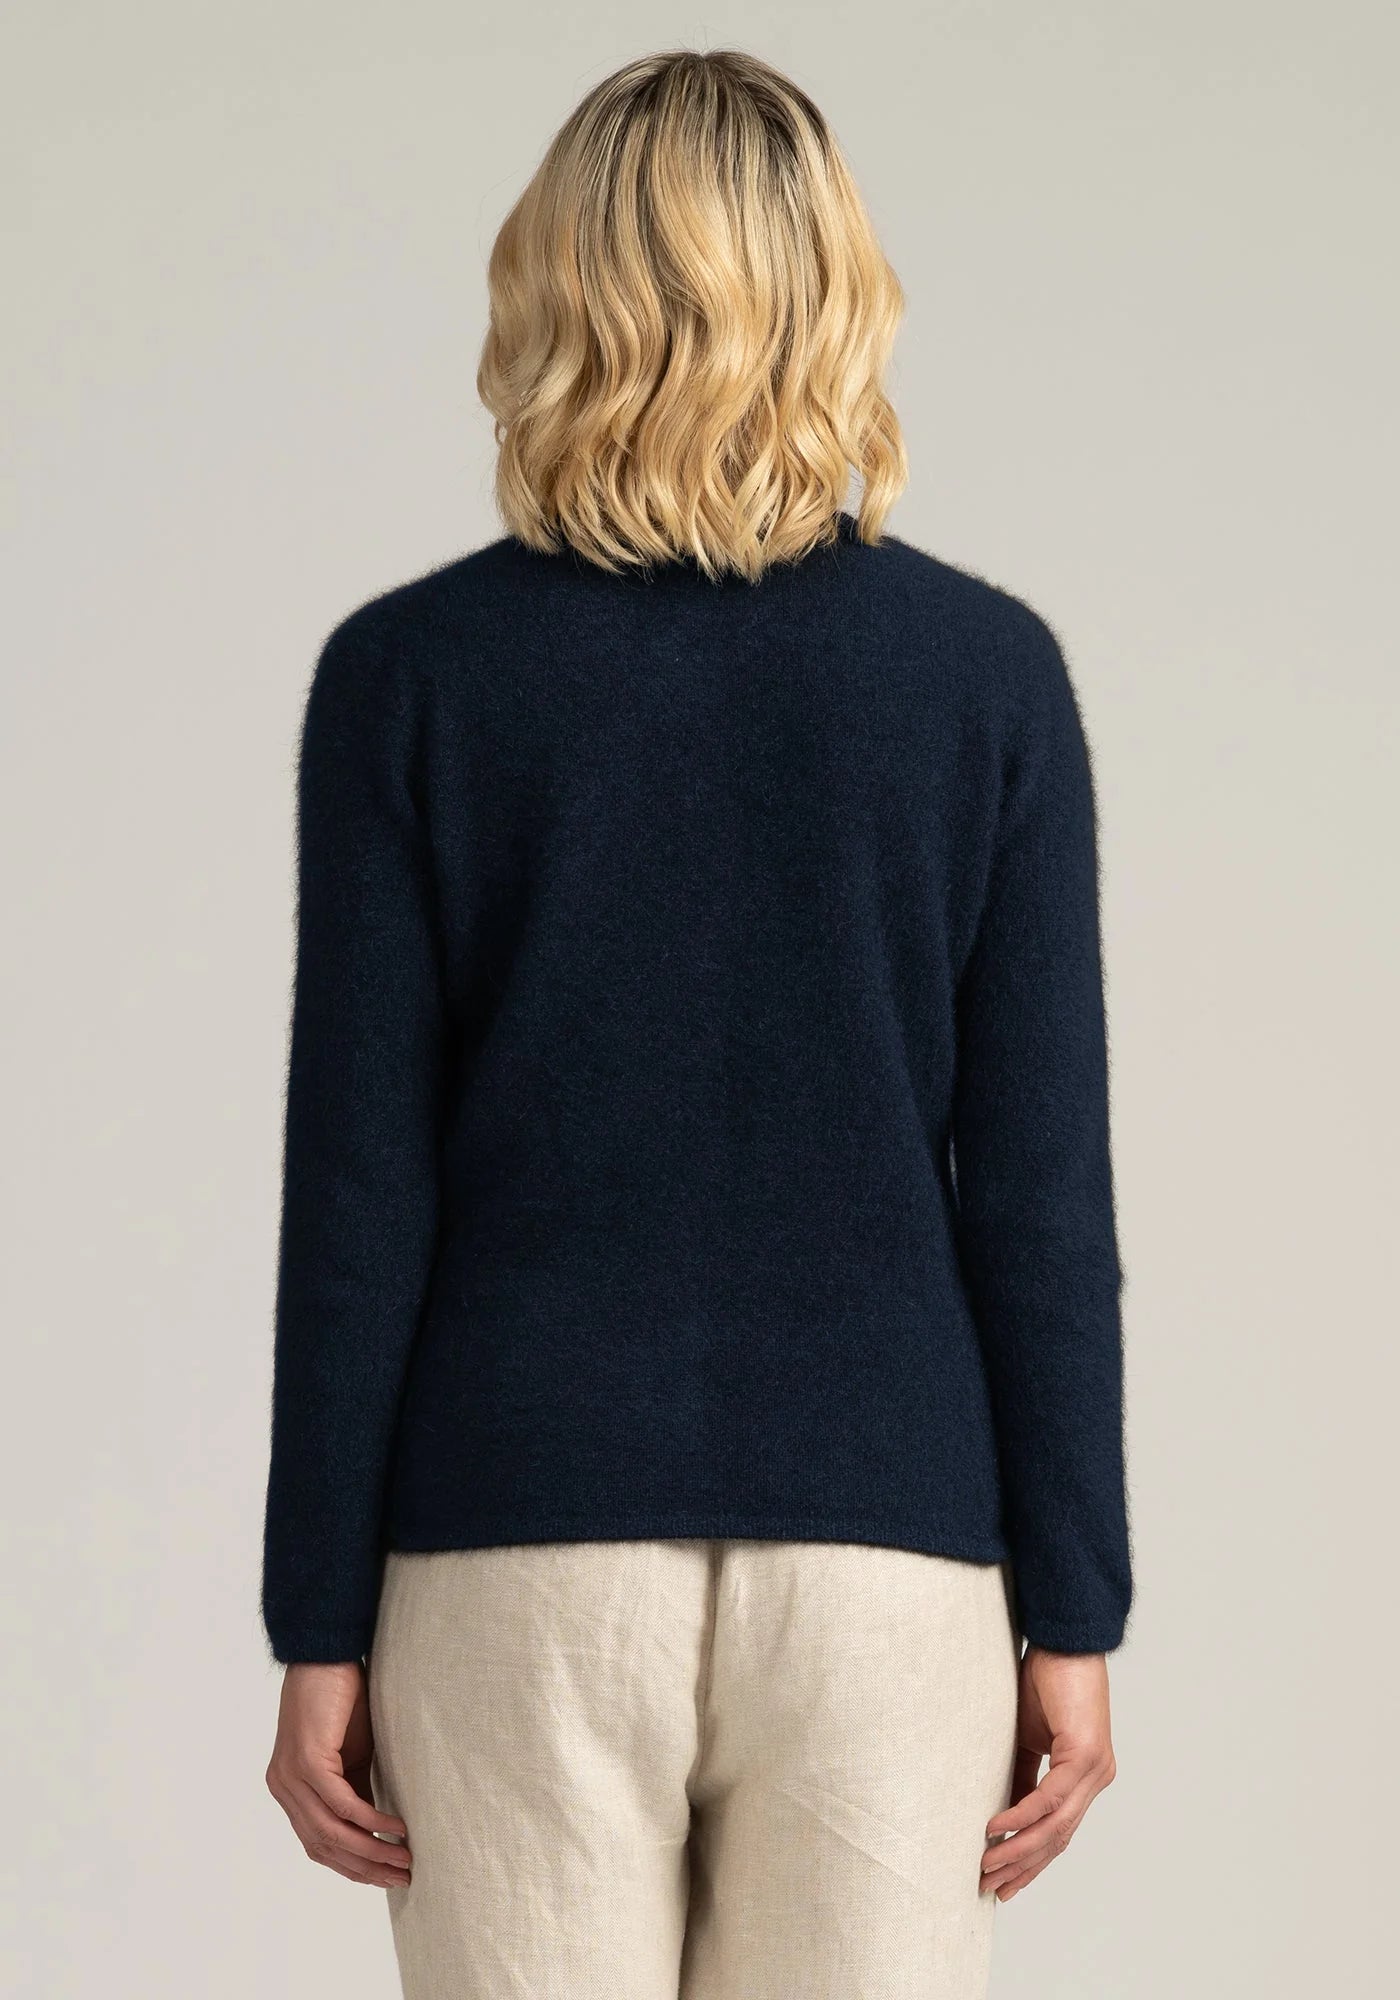 Our pure merino wool navy blue cardigan offers unparalleled comfort and style. Ideal for any season, any occasion. Shop now for premium quality!